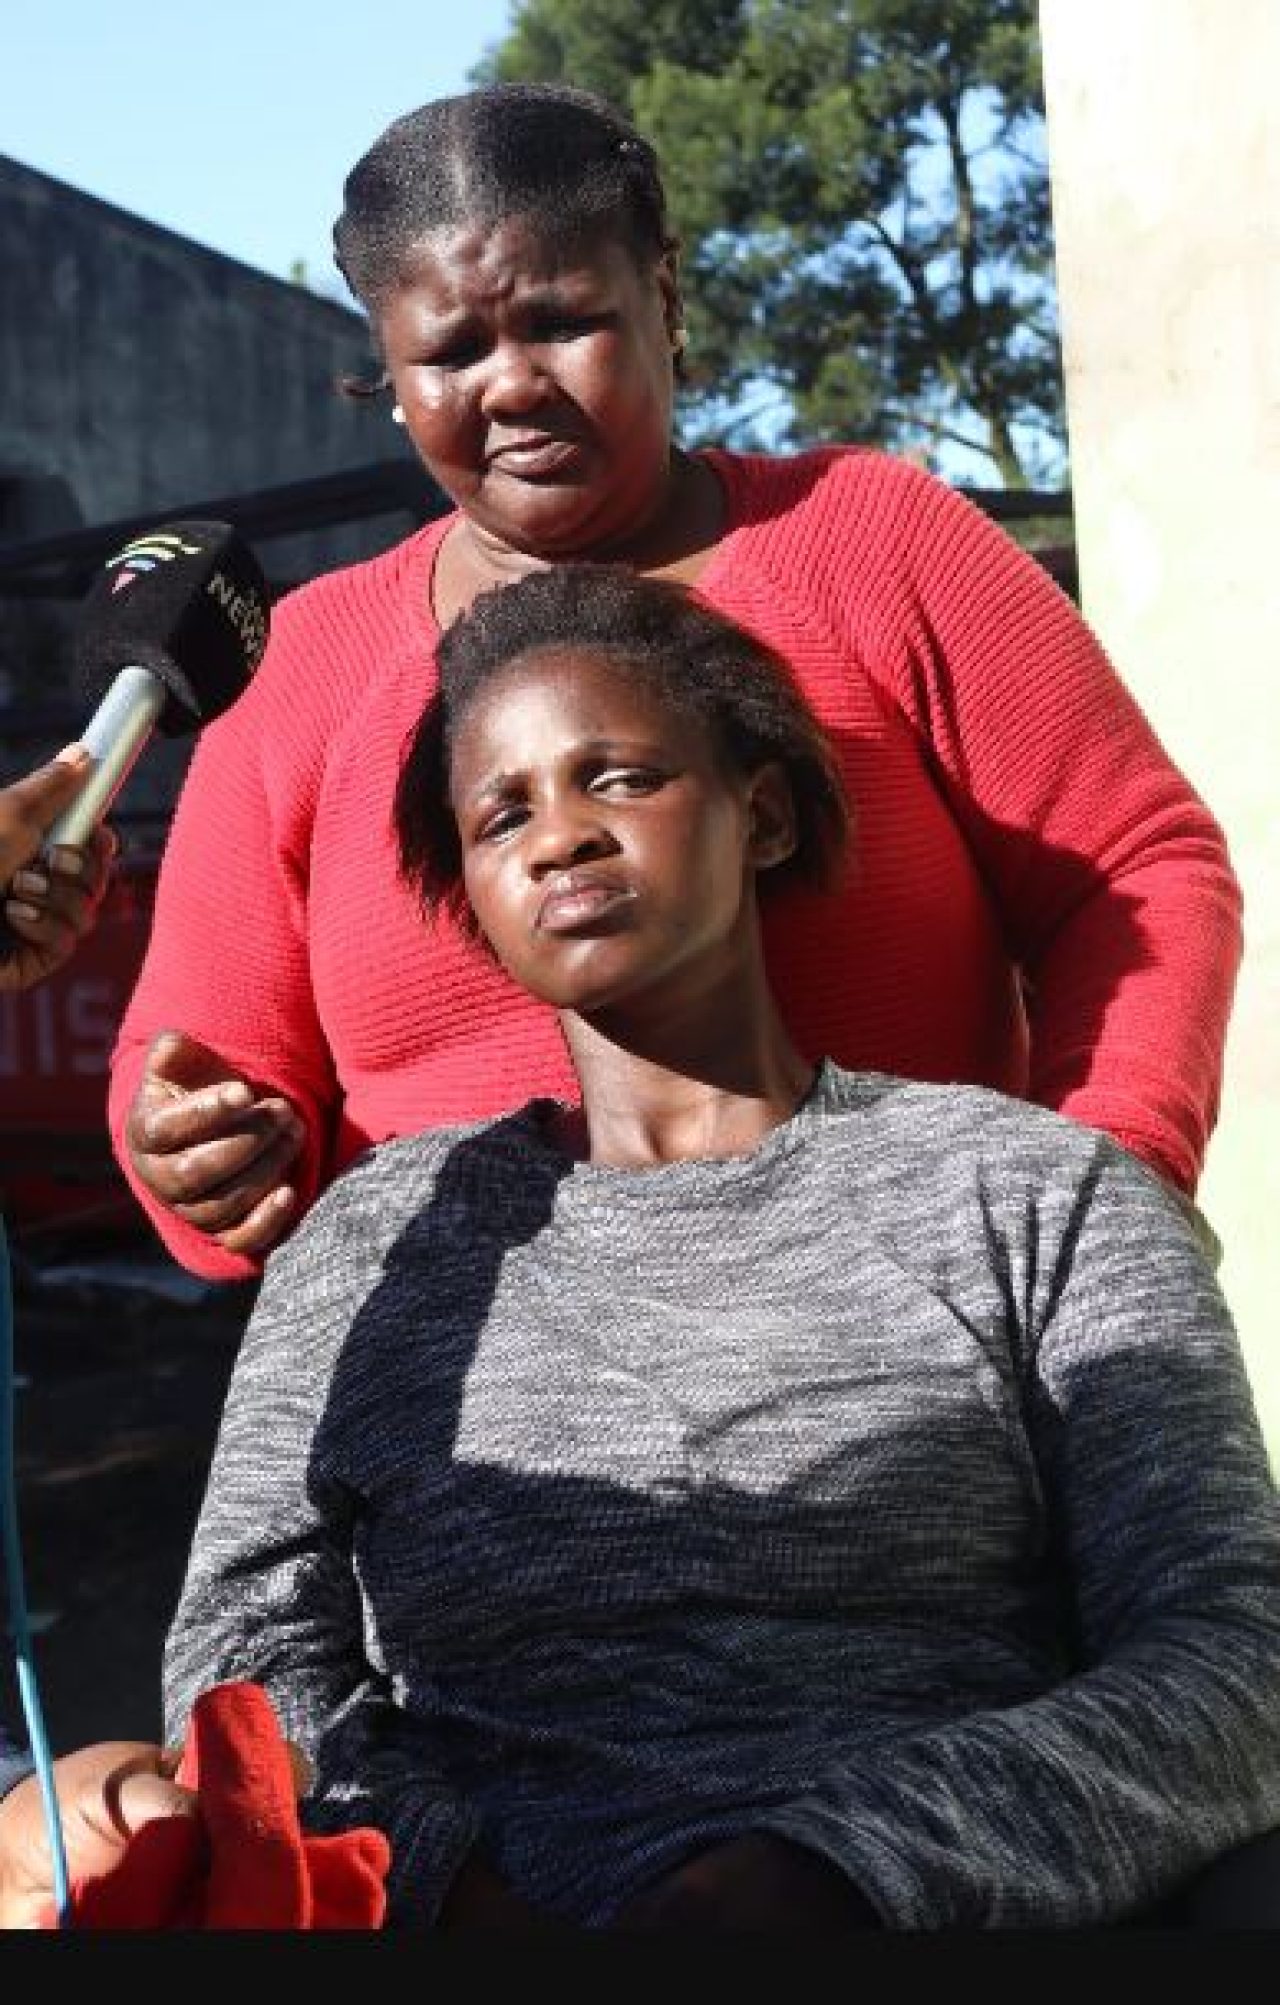 23-year-old Sivenathi Toto, left paralyzed and brain damaged after brutal attack by her boyfriend's rival. Afro News Wire